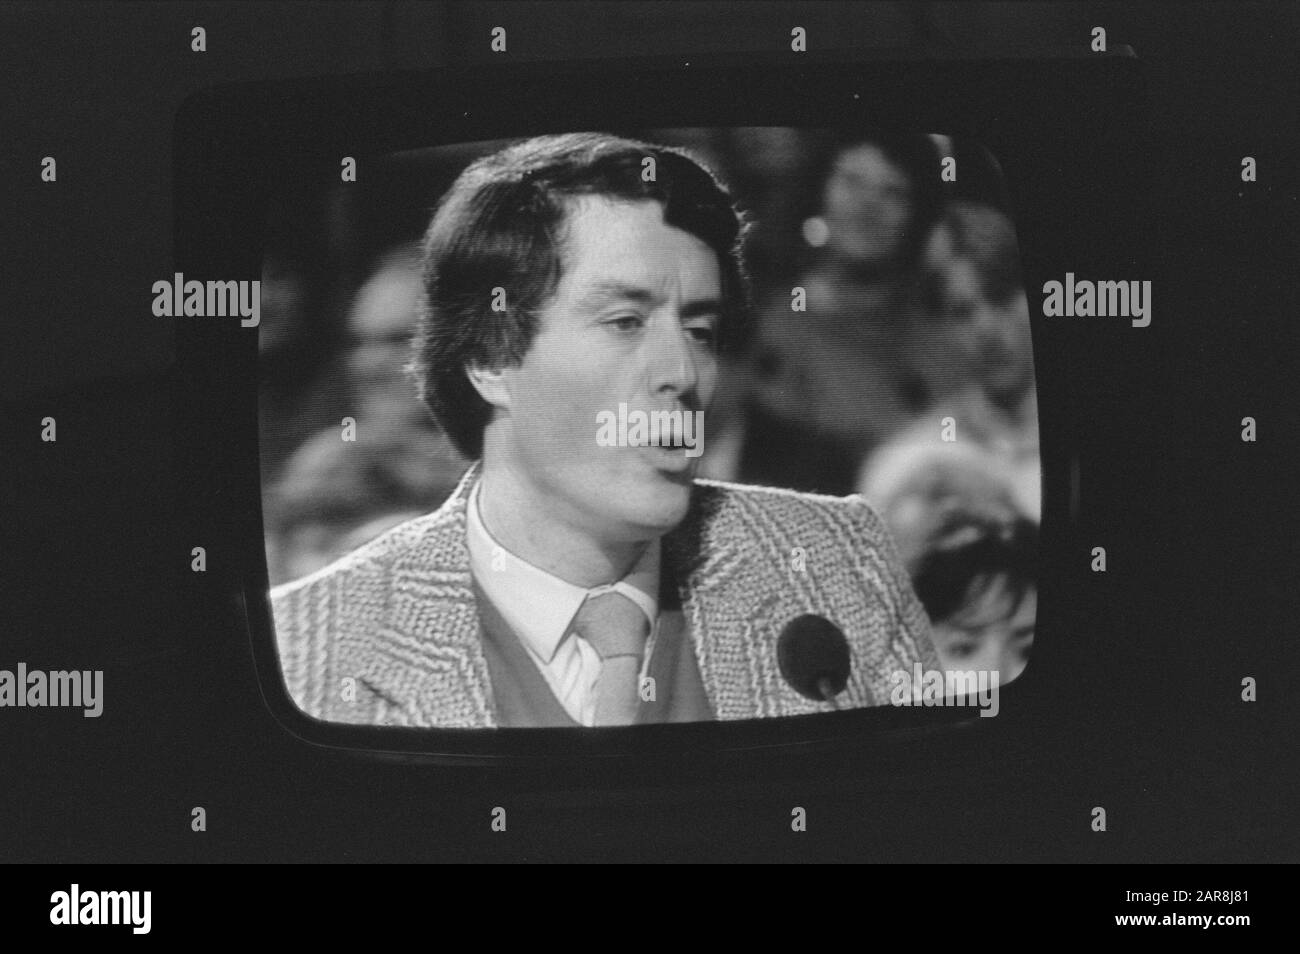 Stanley H. on the TV in the program Sonja on Saturday; lawyer Leo Spigt  Date: 28 January 1985 Keywords: lawyers, television programs Personal name:  Spigt, Leo Stock Photo - Alamy